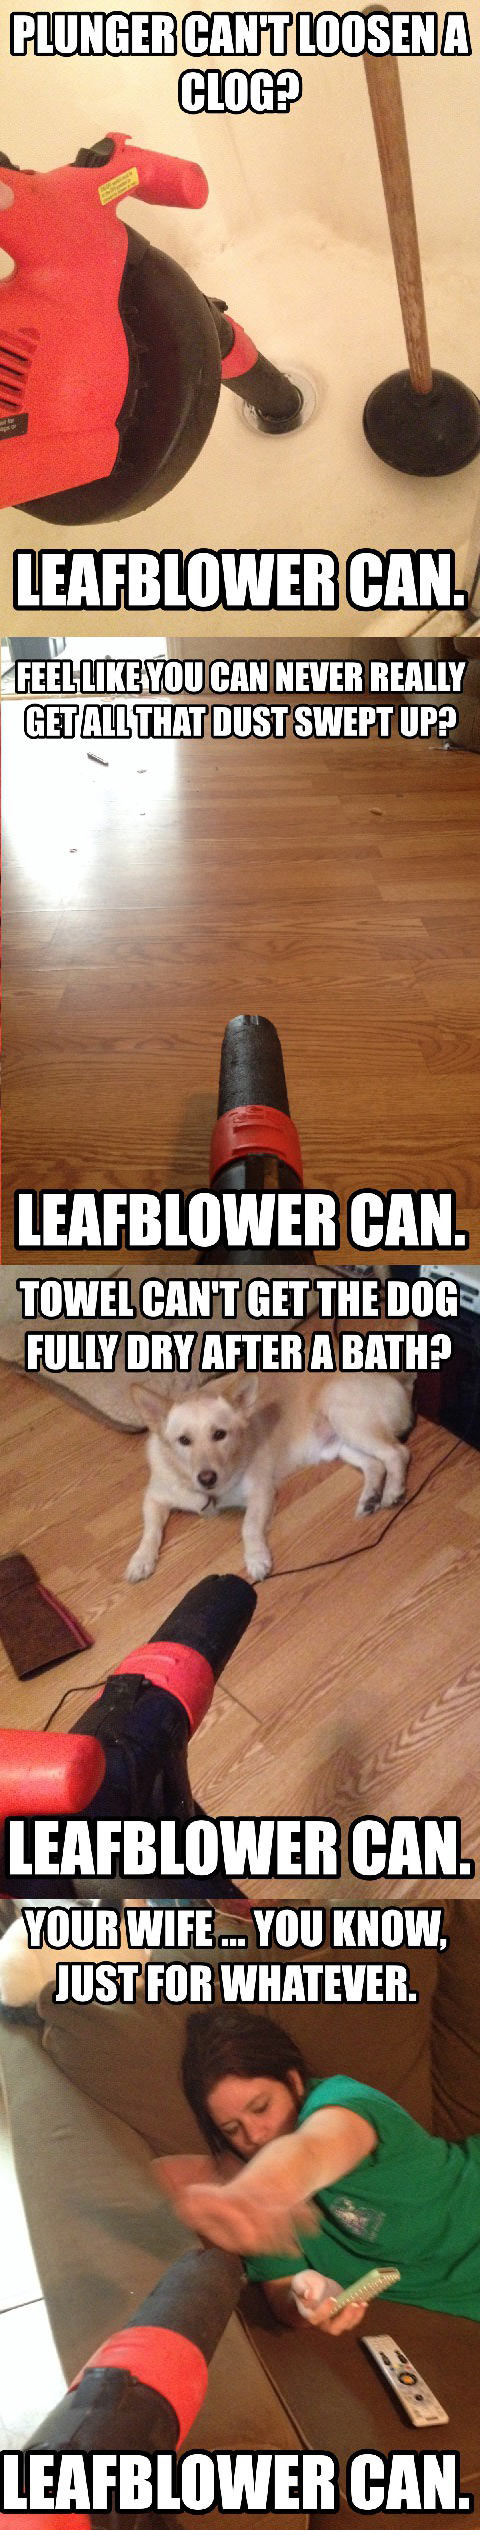 Leaf blowers can achieve anything…